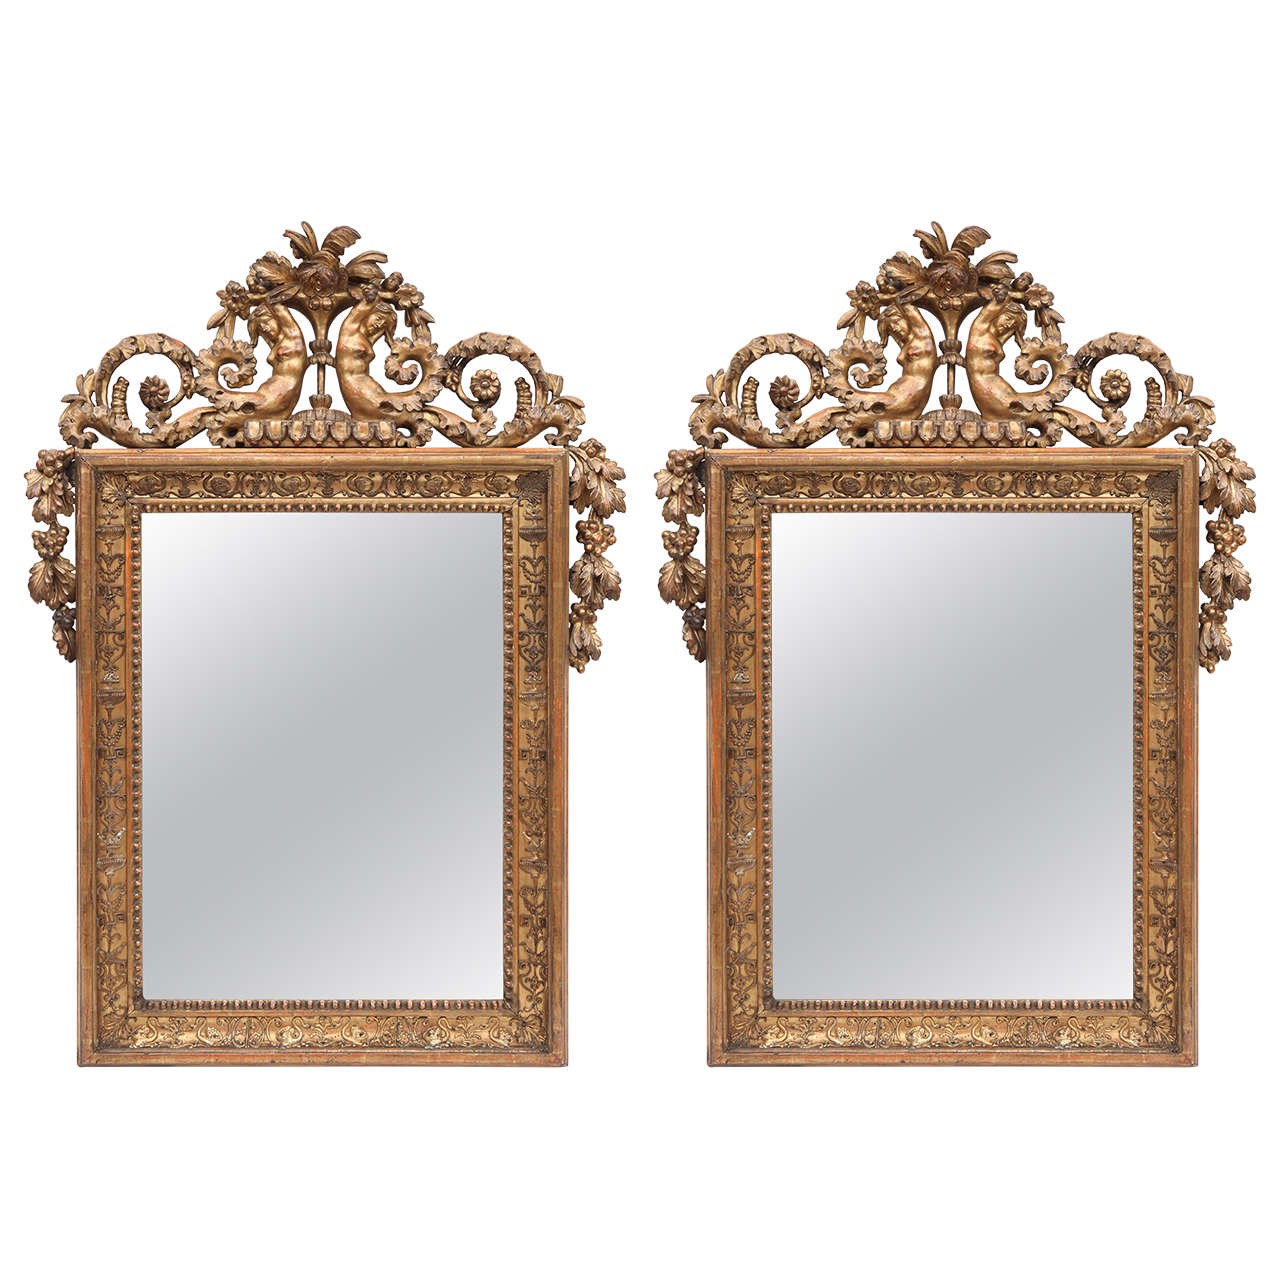 Pair of 19th Century French Empire Giltwood Mirrors